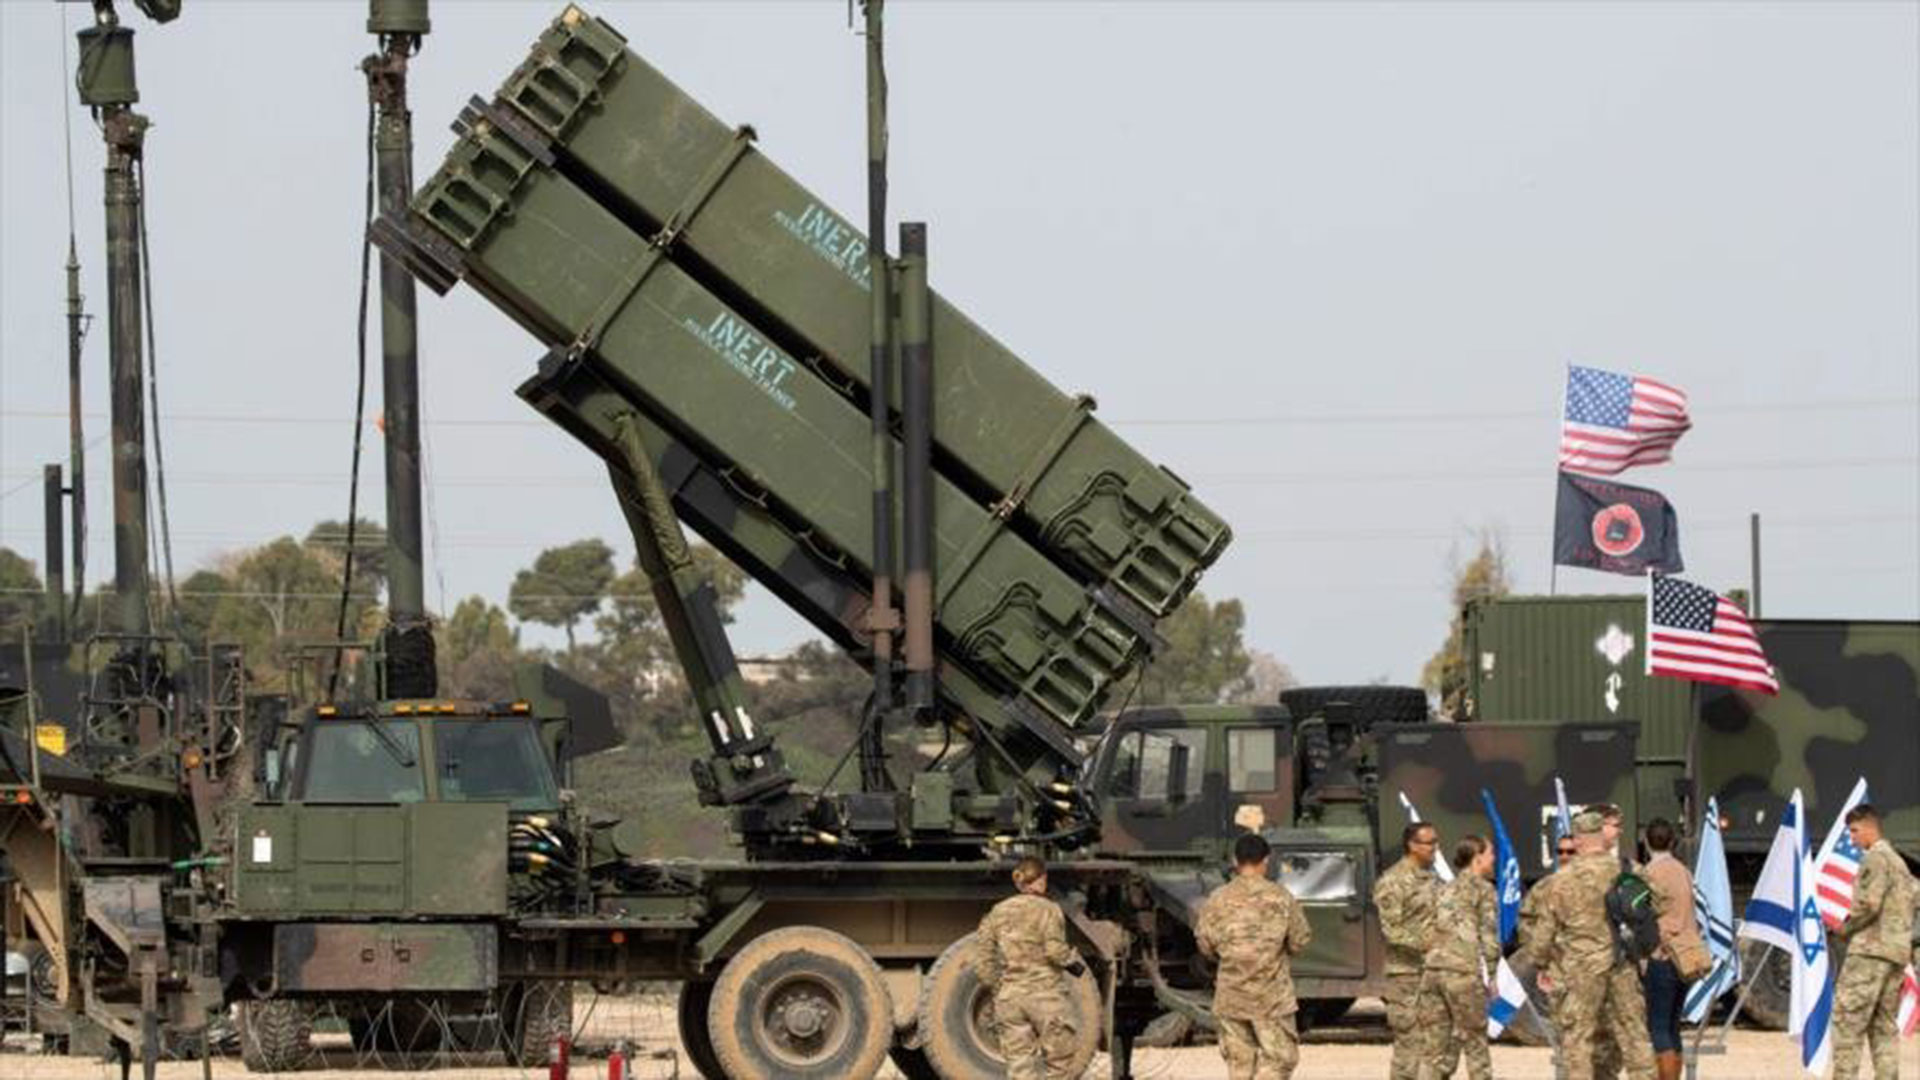 Patriot missiles are the most modern defense systems that the West sent to Ukraine as part of the war